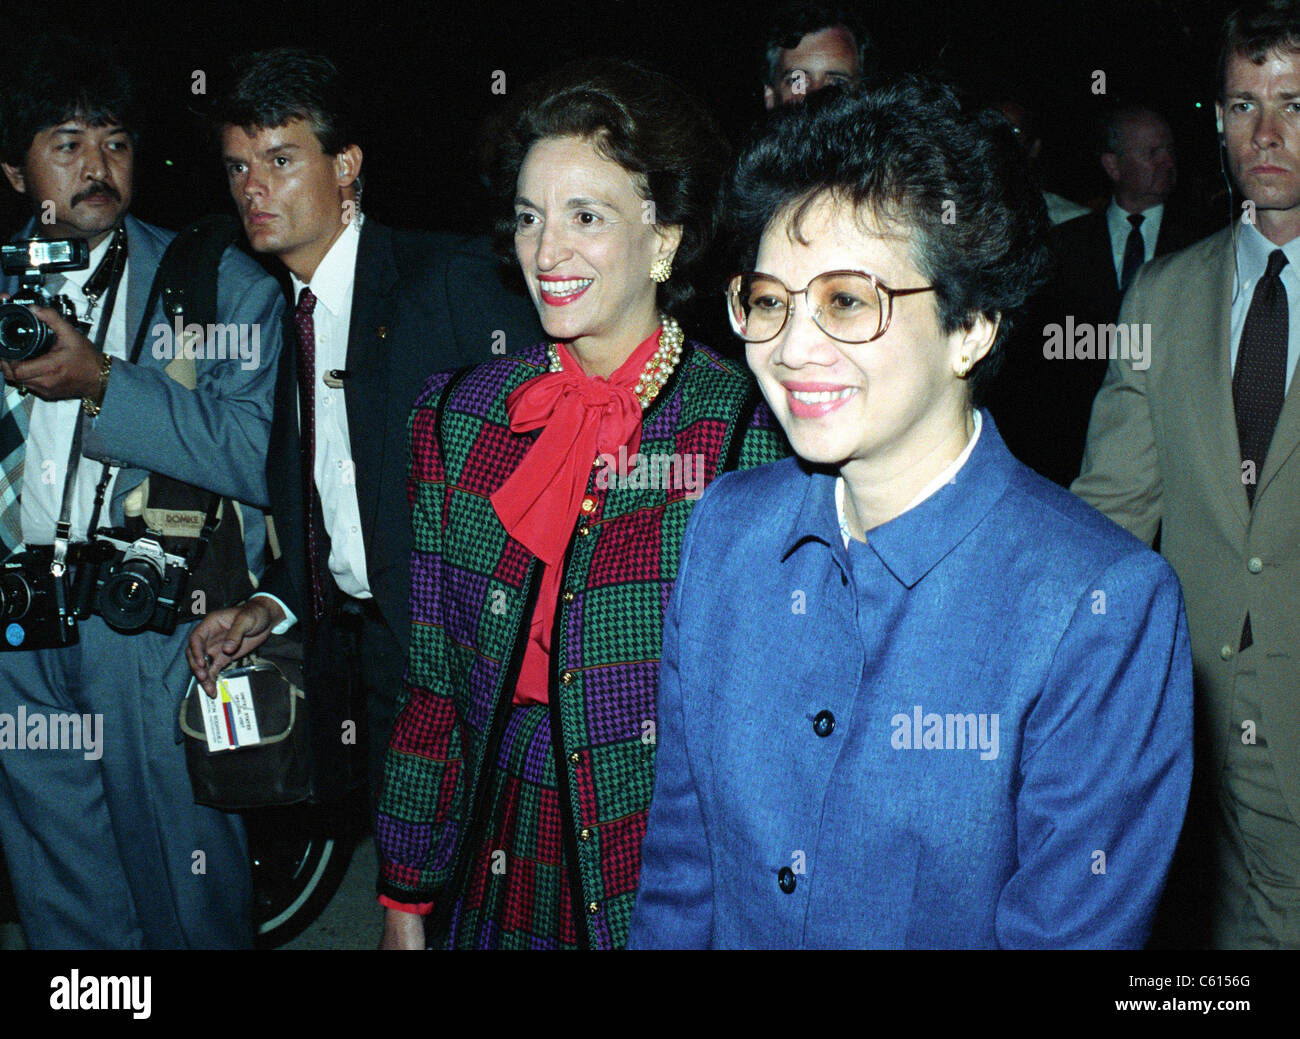 Philippine President Corazon C. Aquino 1933-2009 arriving at Andrews Air Force Base seven months after she led protests that ousted Ferdinand E. Marcos. Sept. 15 1986., Photo by:Everett Collection(BSLOC 2011 6 112) Stock Photo